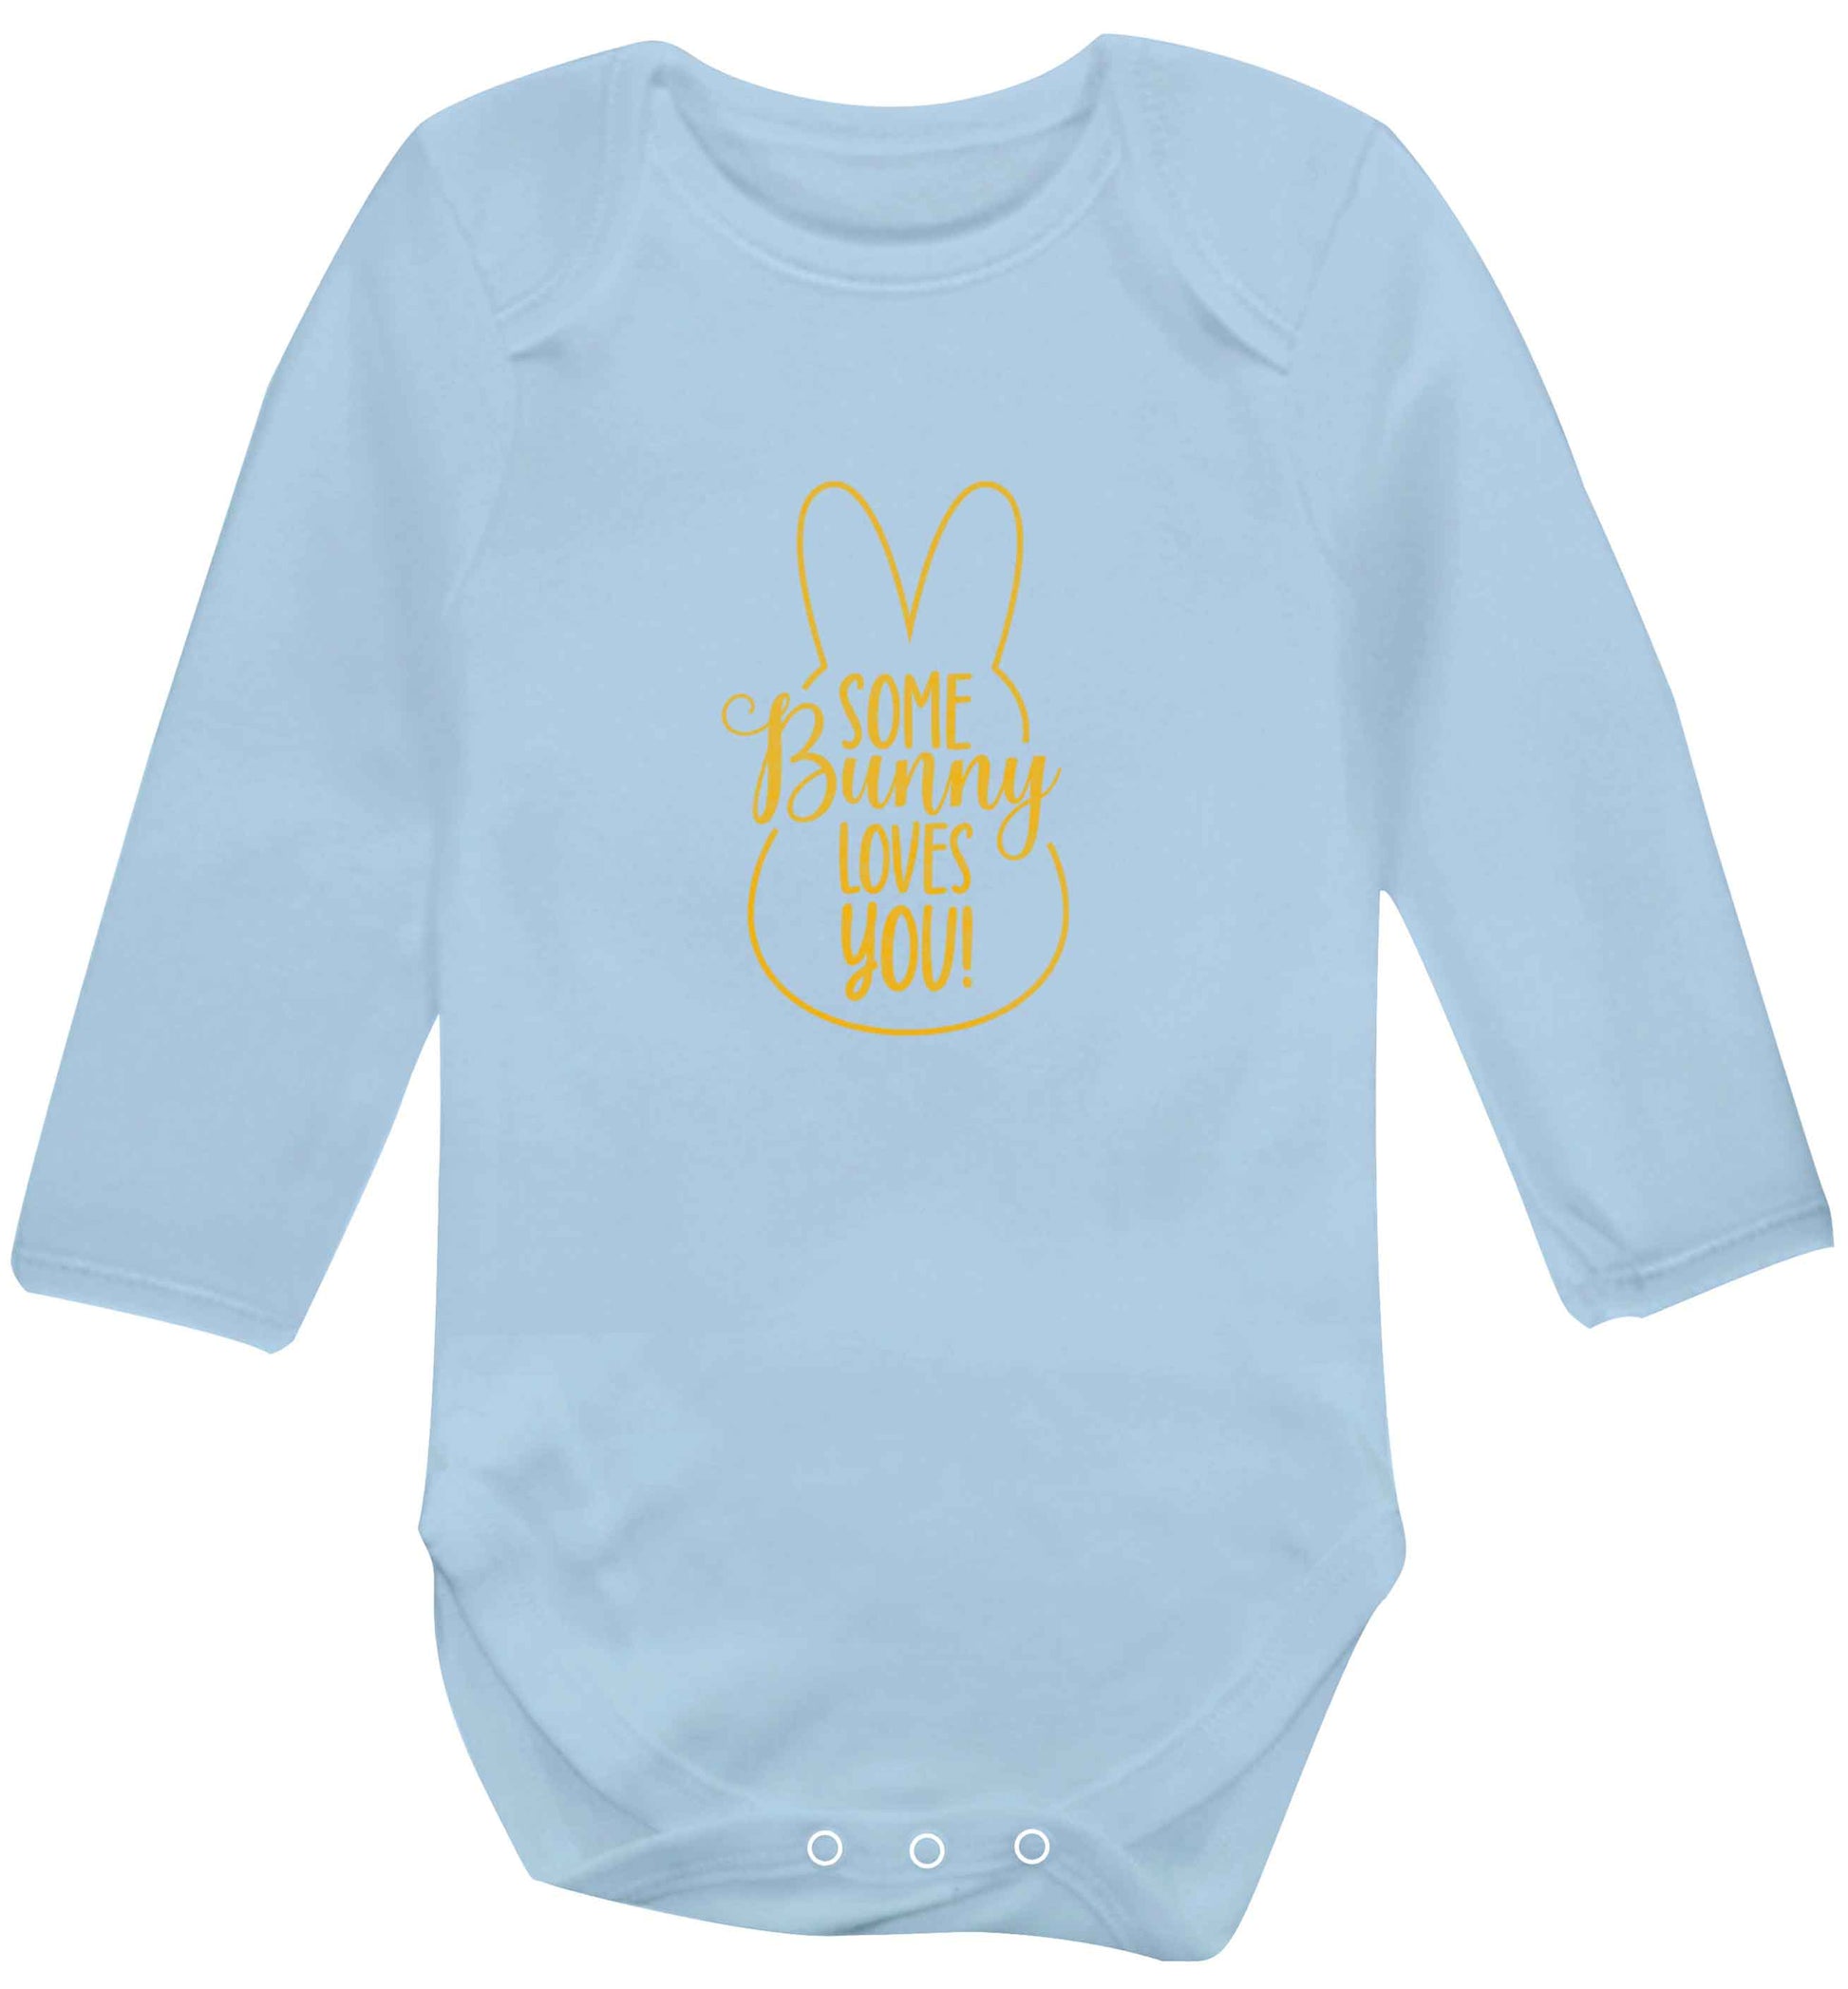 Some bunny loves you baby vest long sleeved pale blue 6-12 months